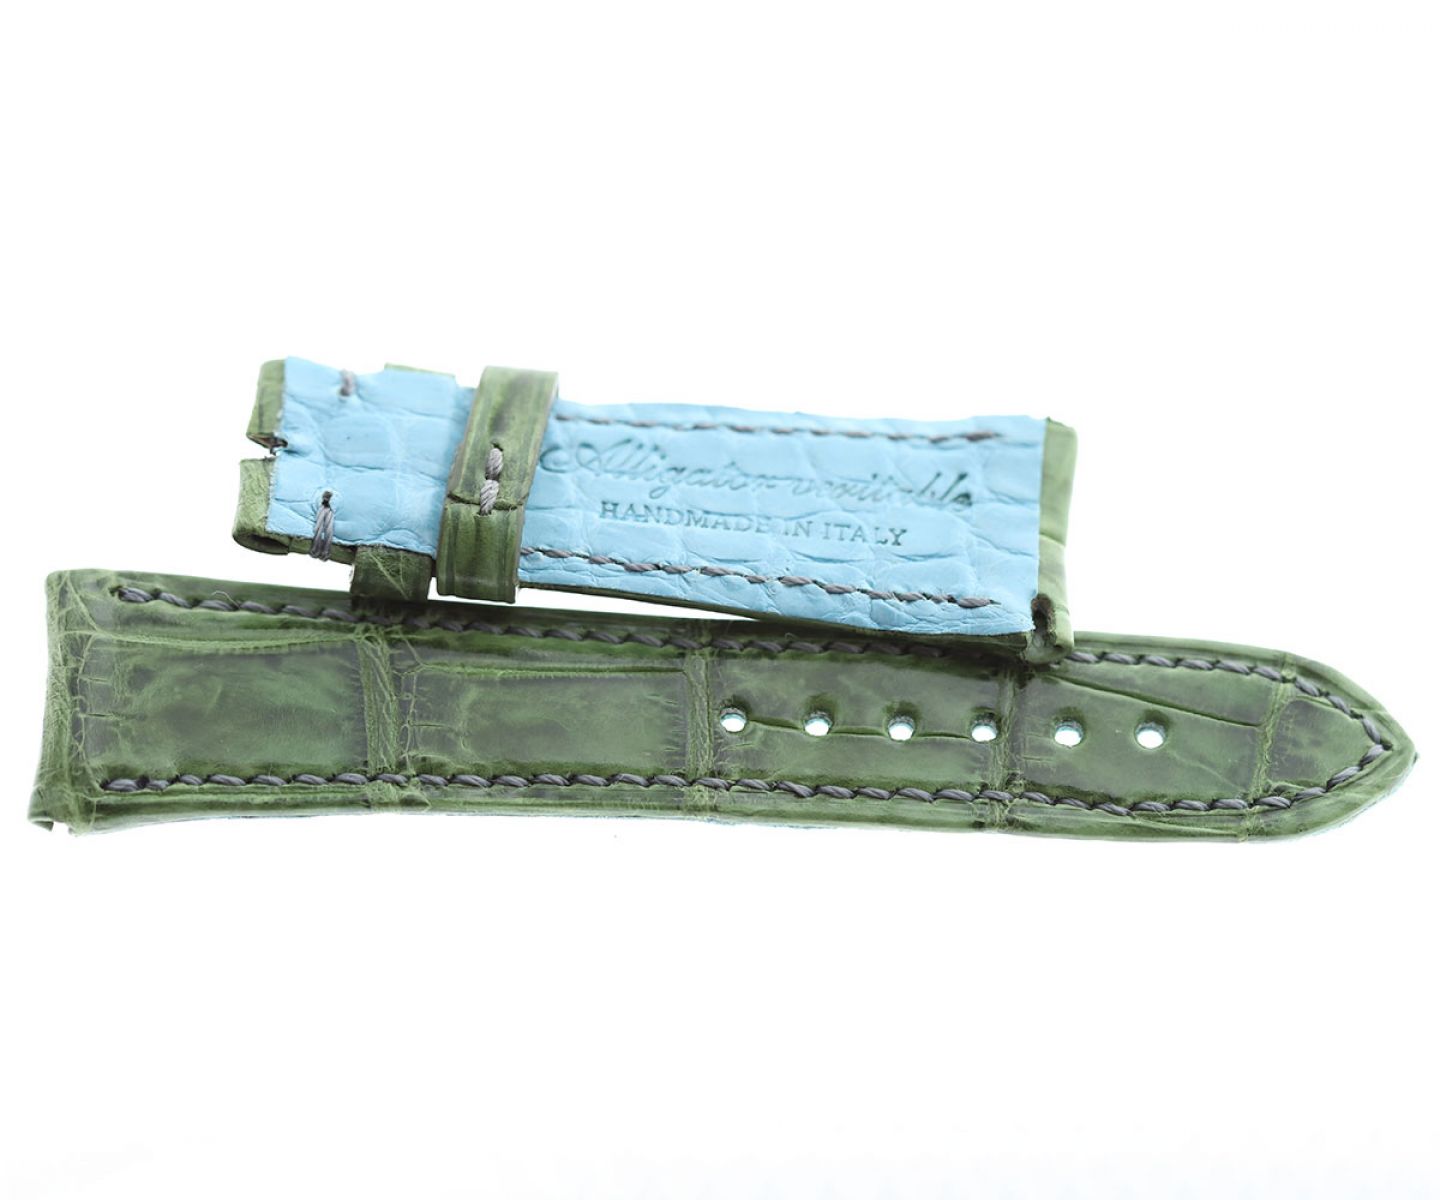 Rolex Cellini Dual / Time / Date Custom made strap in Vintage Green Alligator leather